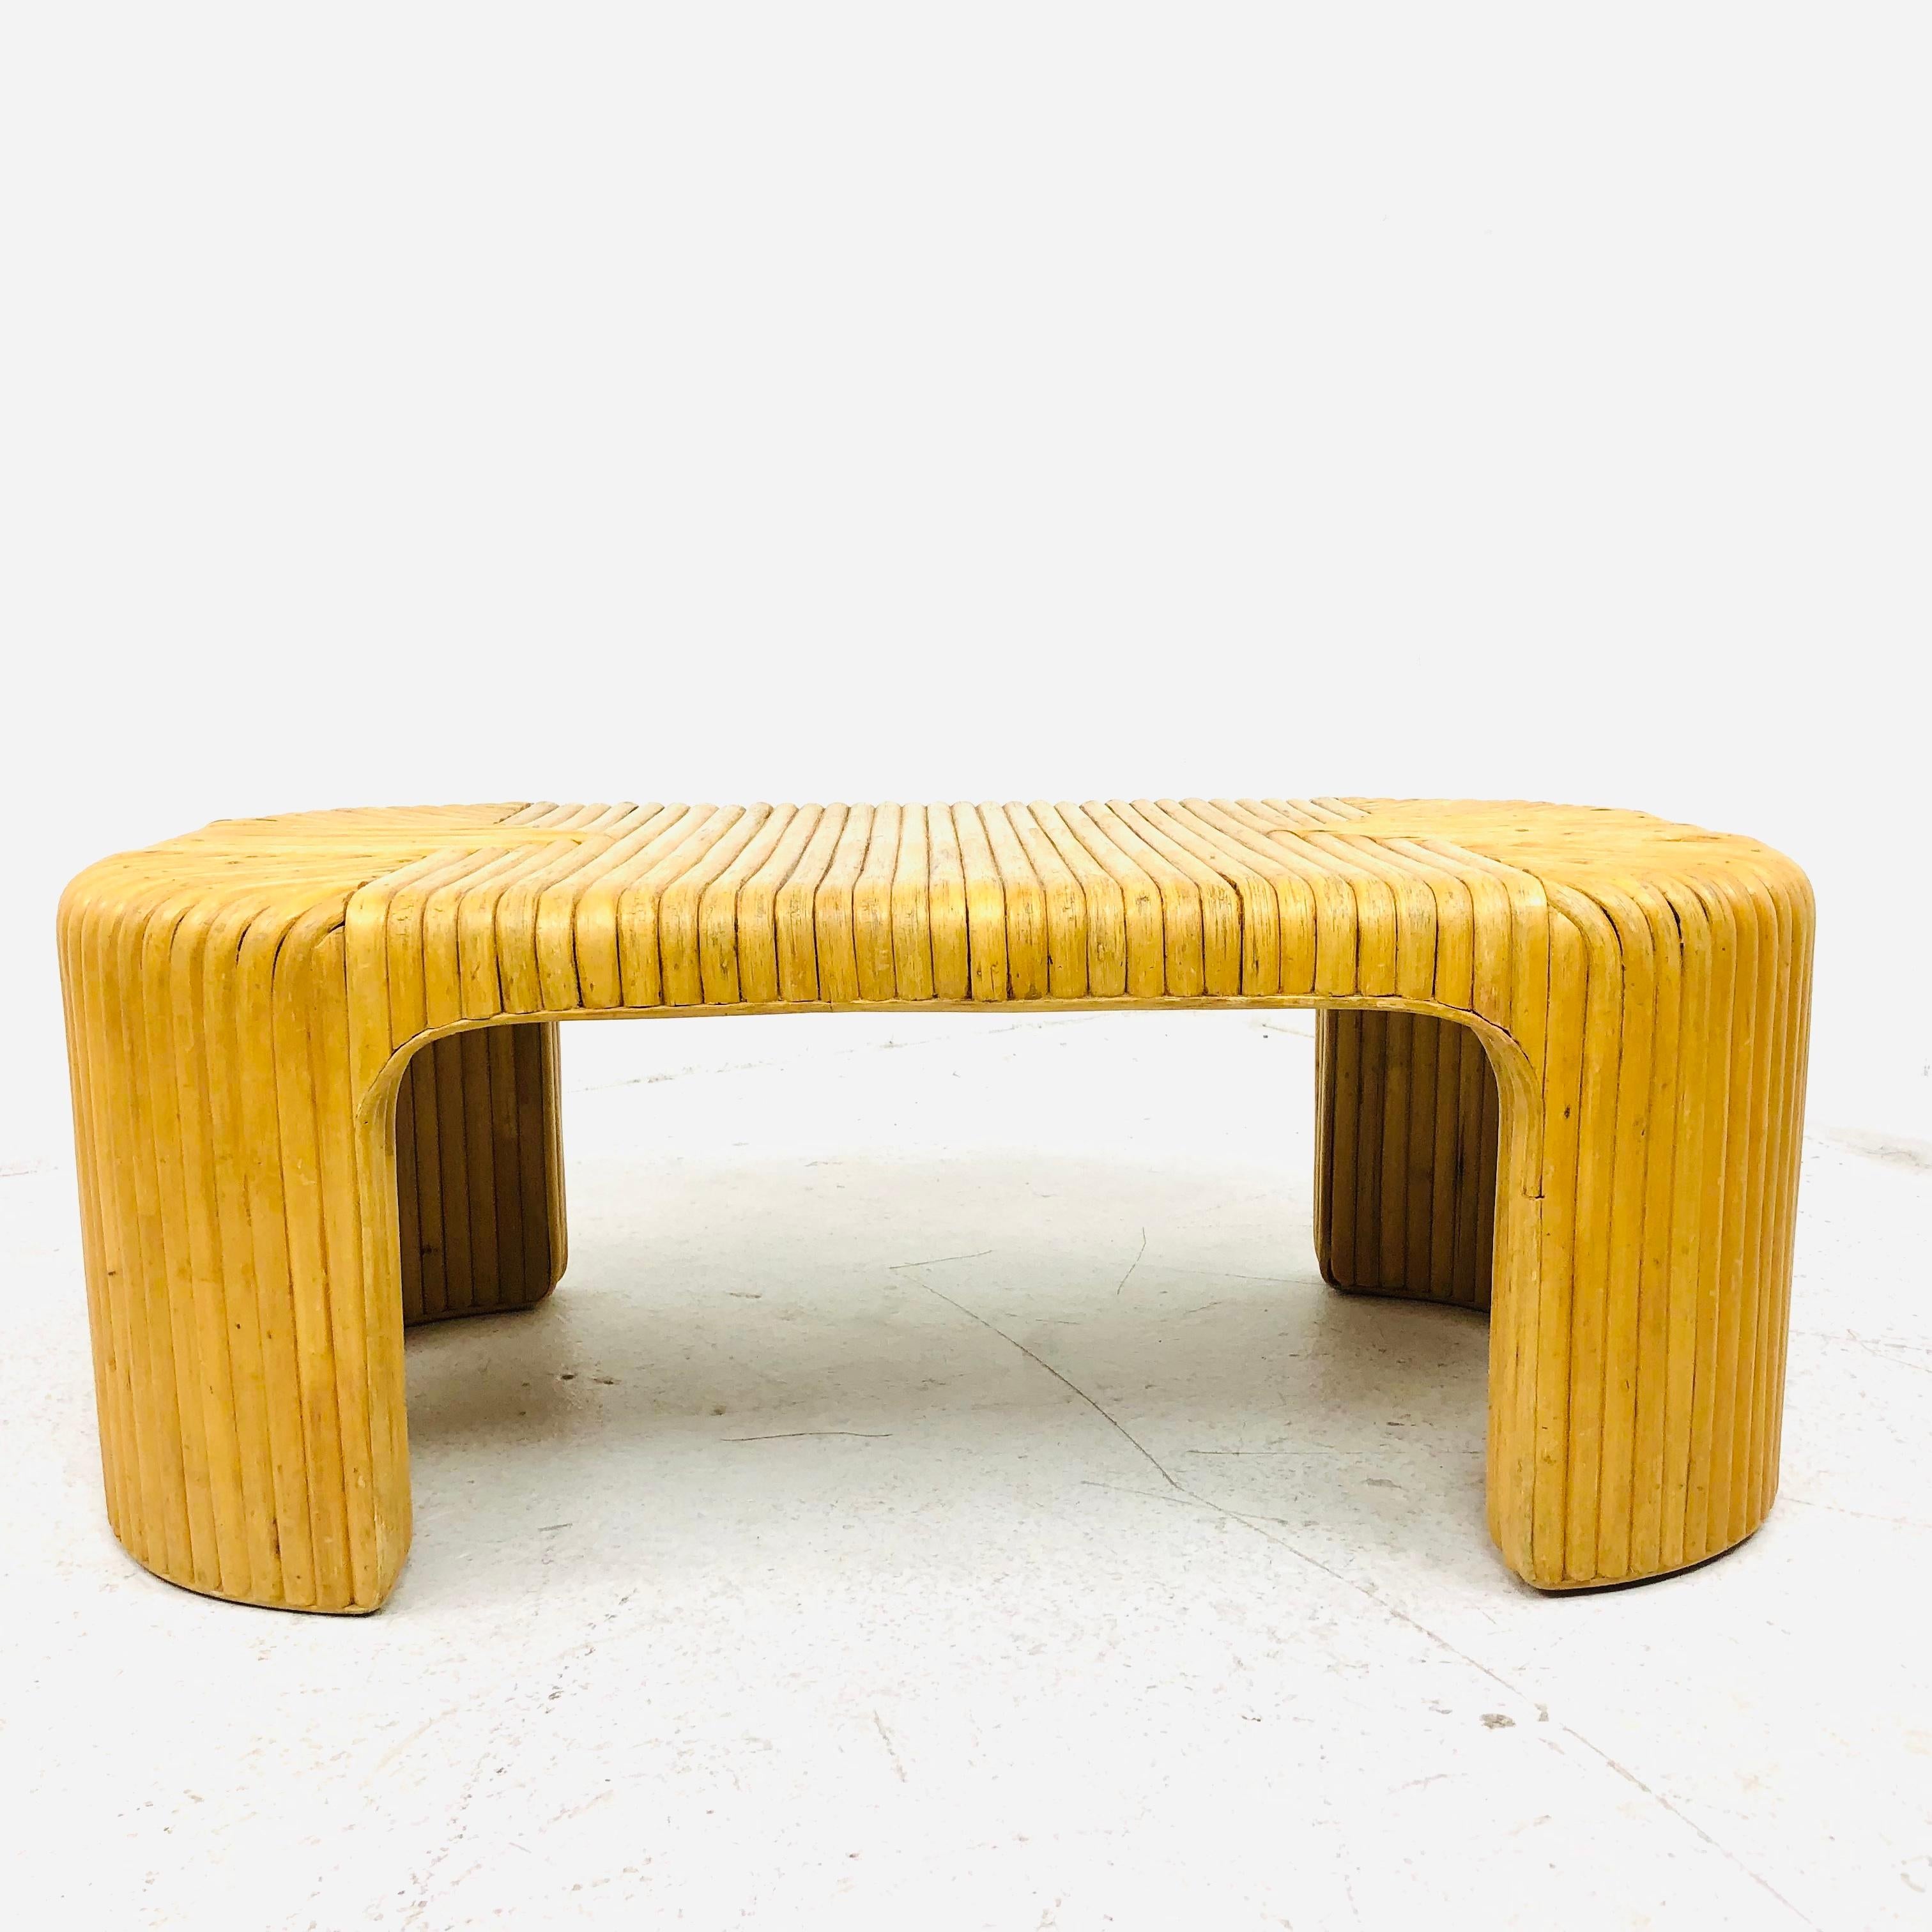 Vintage glam split reed bamboo waterfall coffee table. Original natural finish and distinctive geometric pattern. Expertly made and very sturdy.